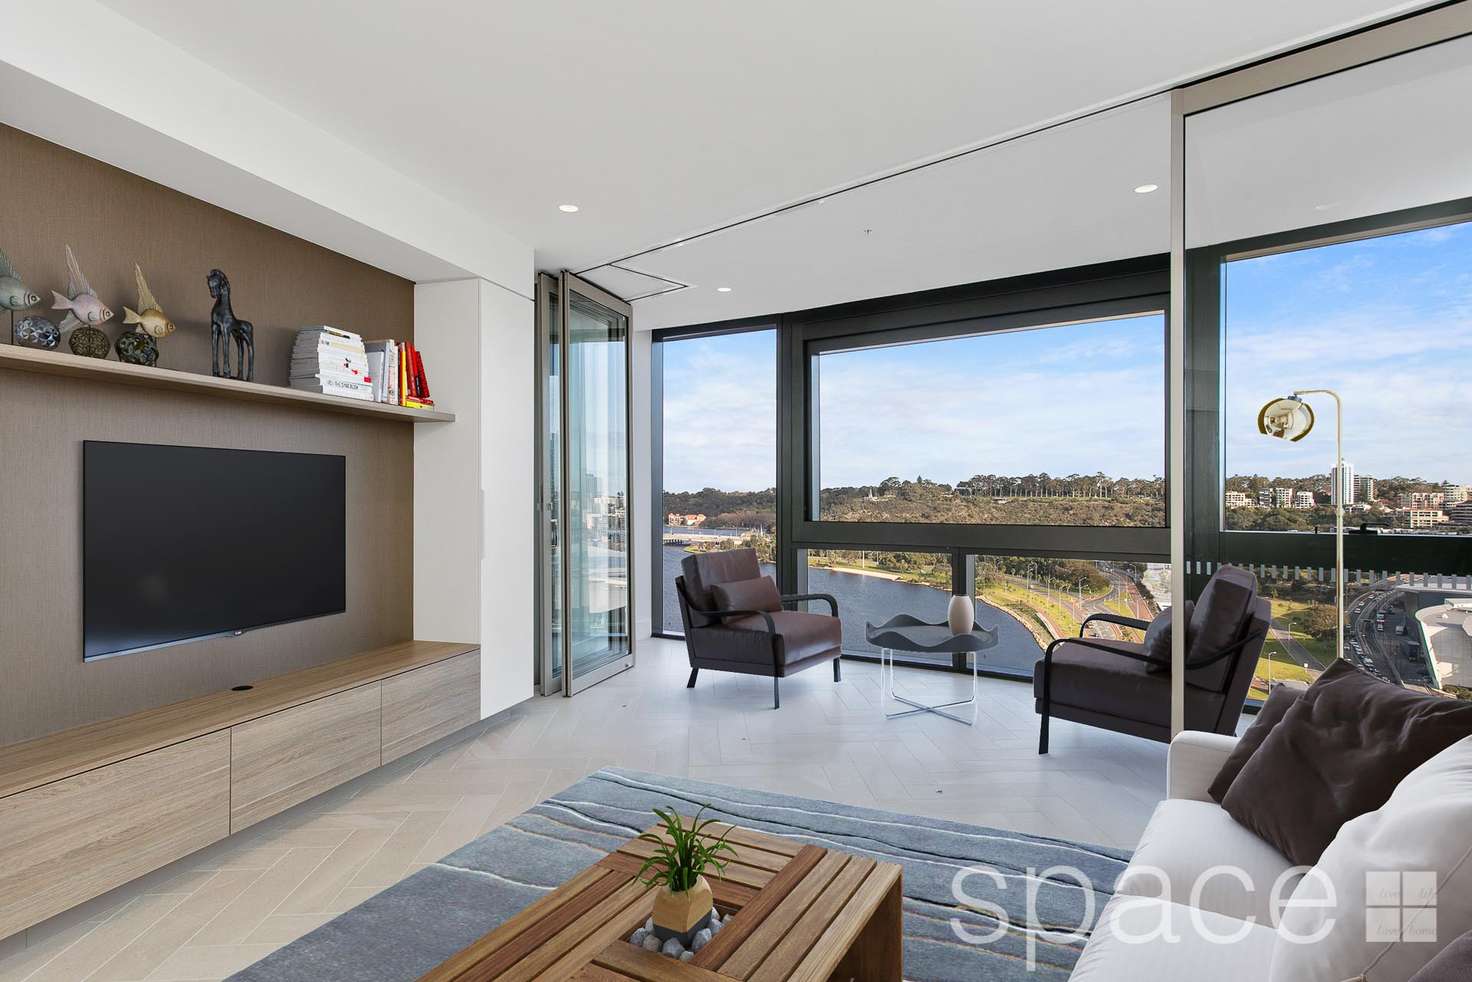 Main view of Homely apartment listing, 2006/11 Barrack Square, Perth WA 6000